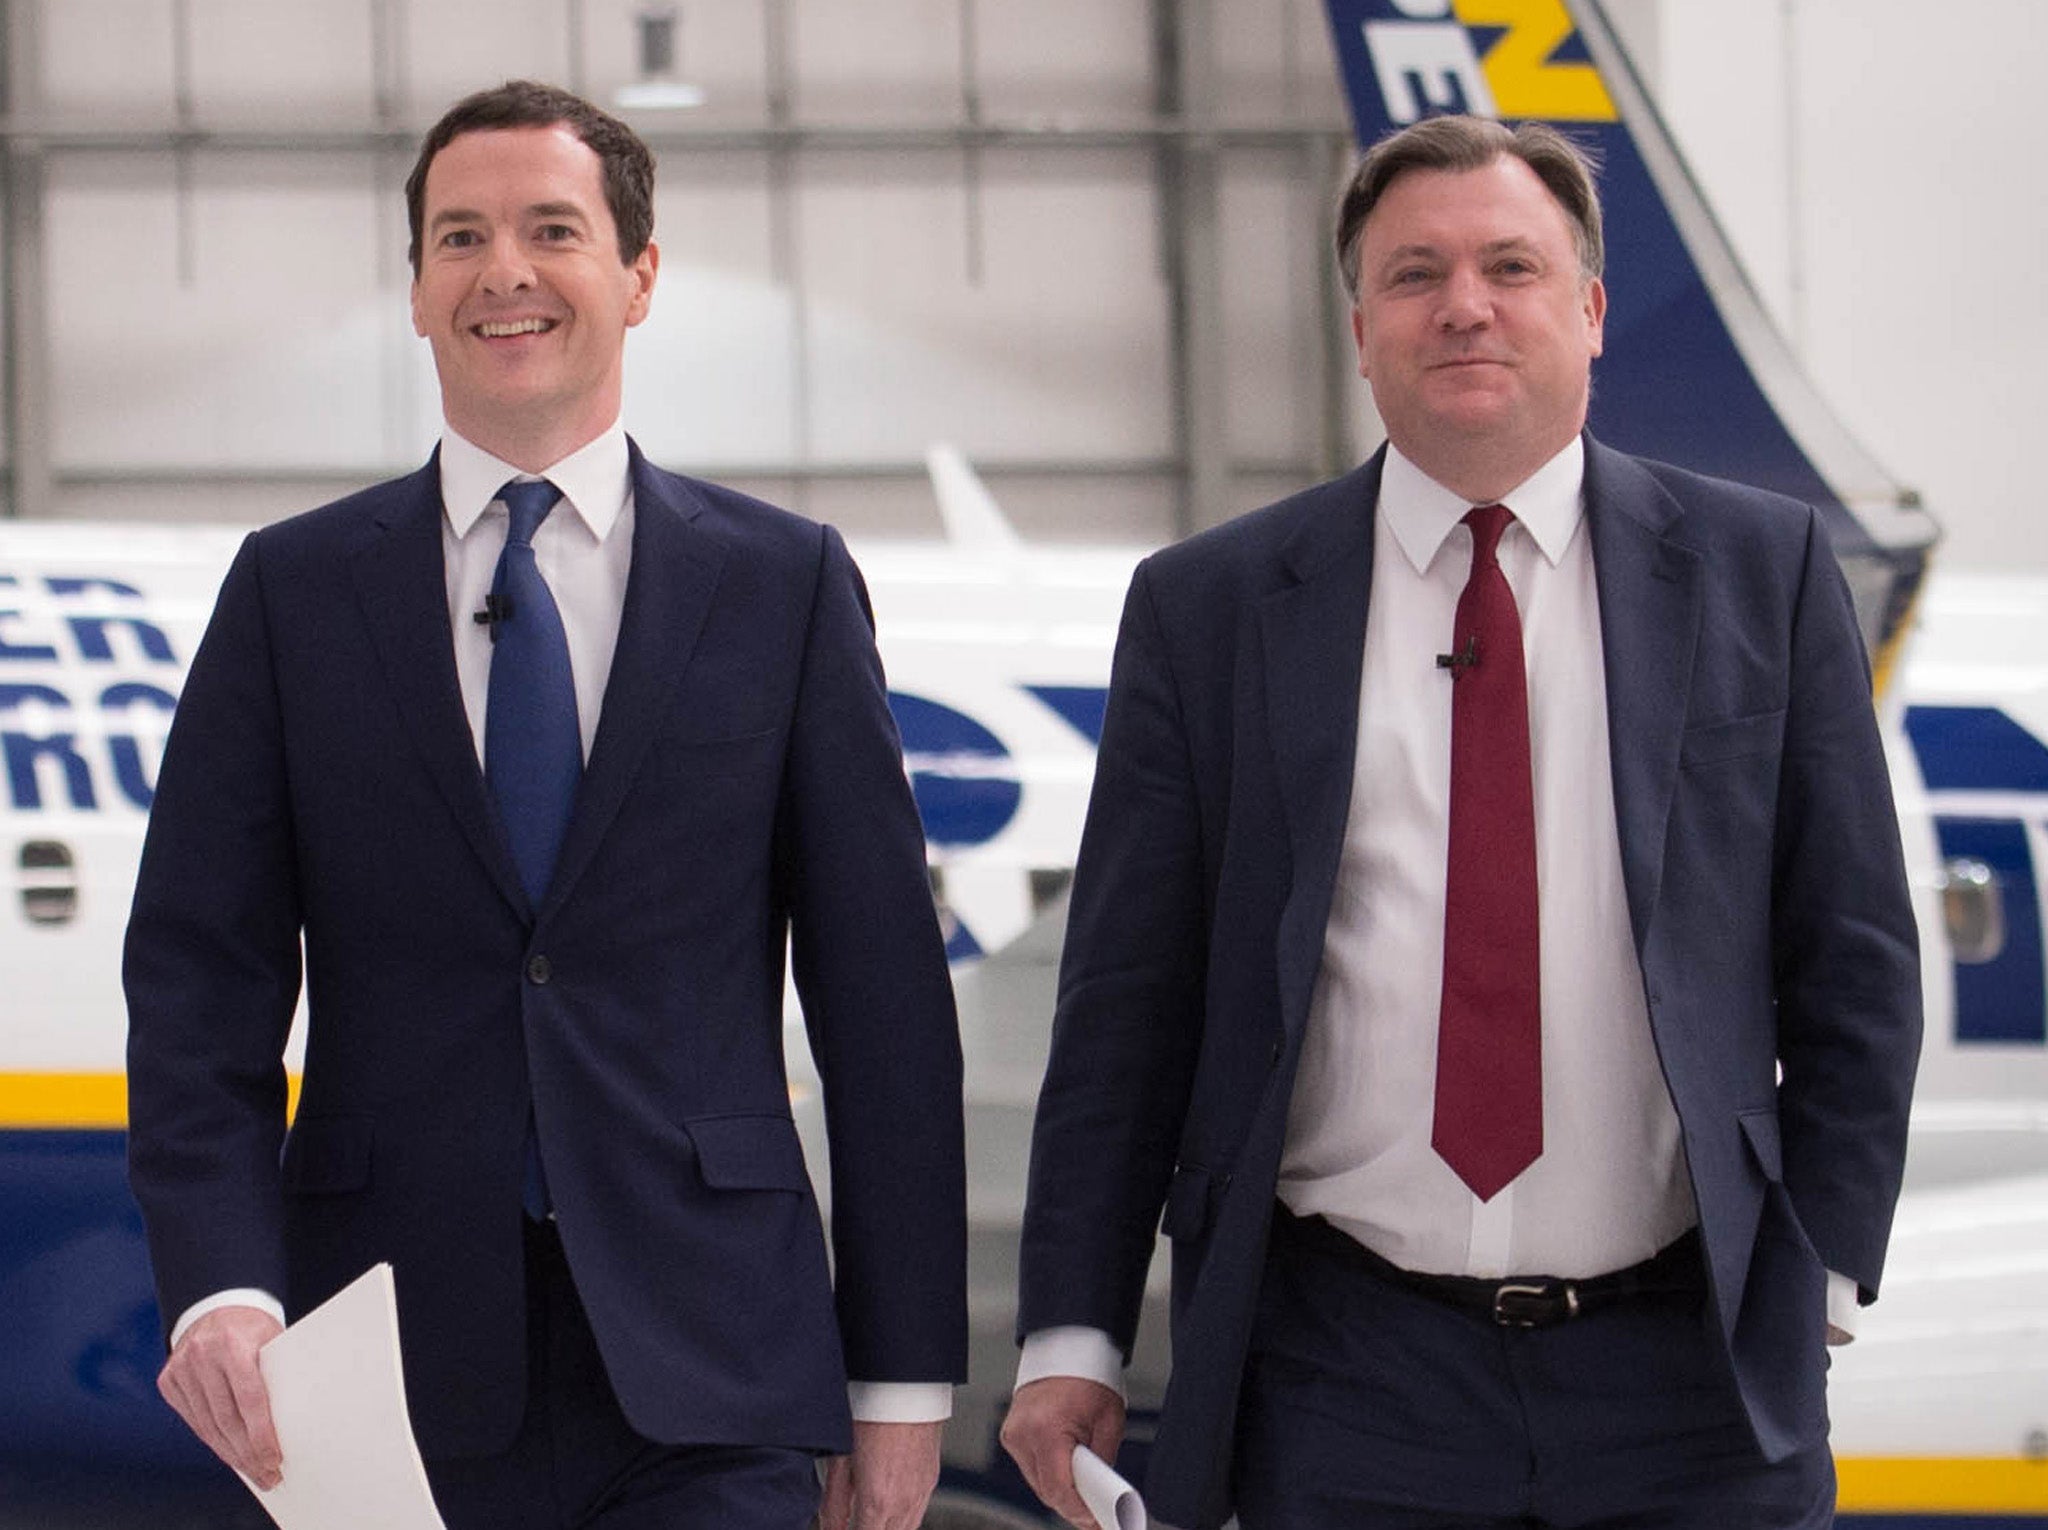 George Osborne (left) and Ed Balls campaigning together during the referendum campaign at Ryanair's base at Stansted Airport